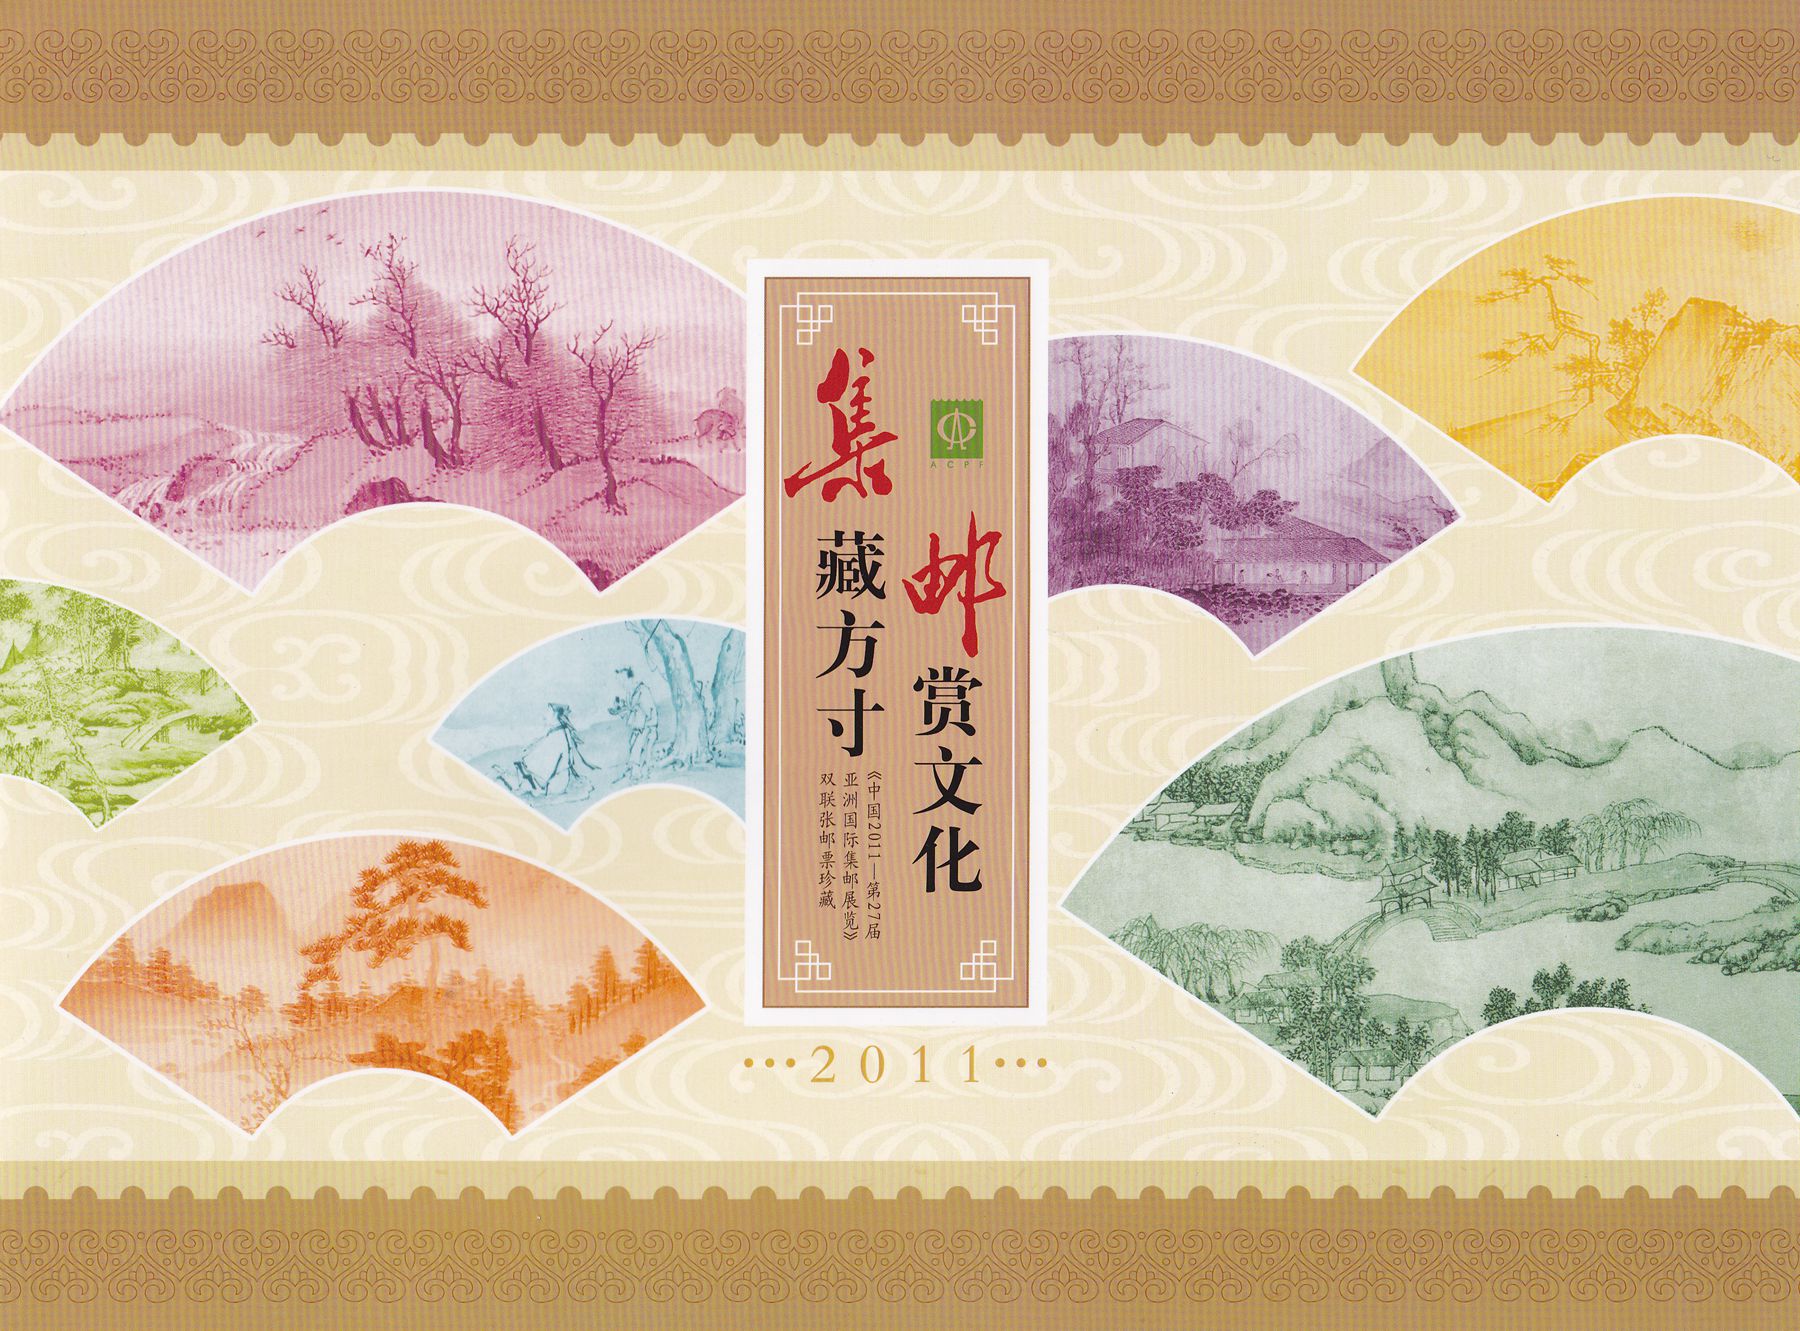 M2802, China 2011 Stamp Exbition MS Stamps, Special Double Uncut Issue - Click Image to Close